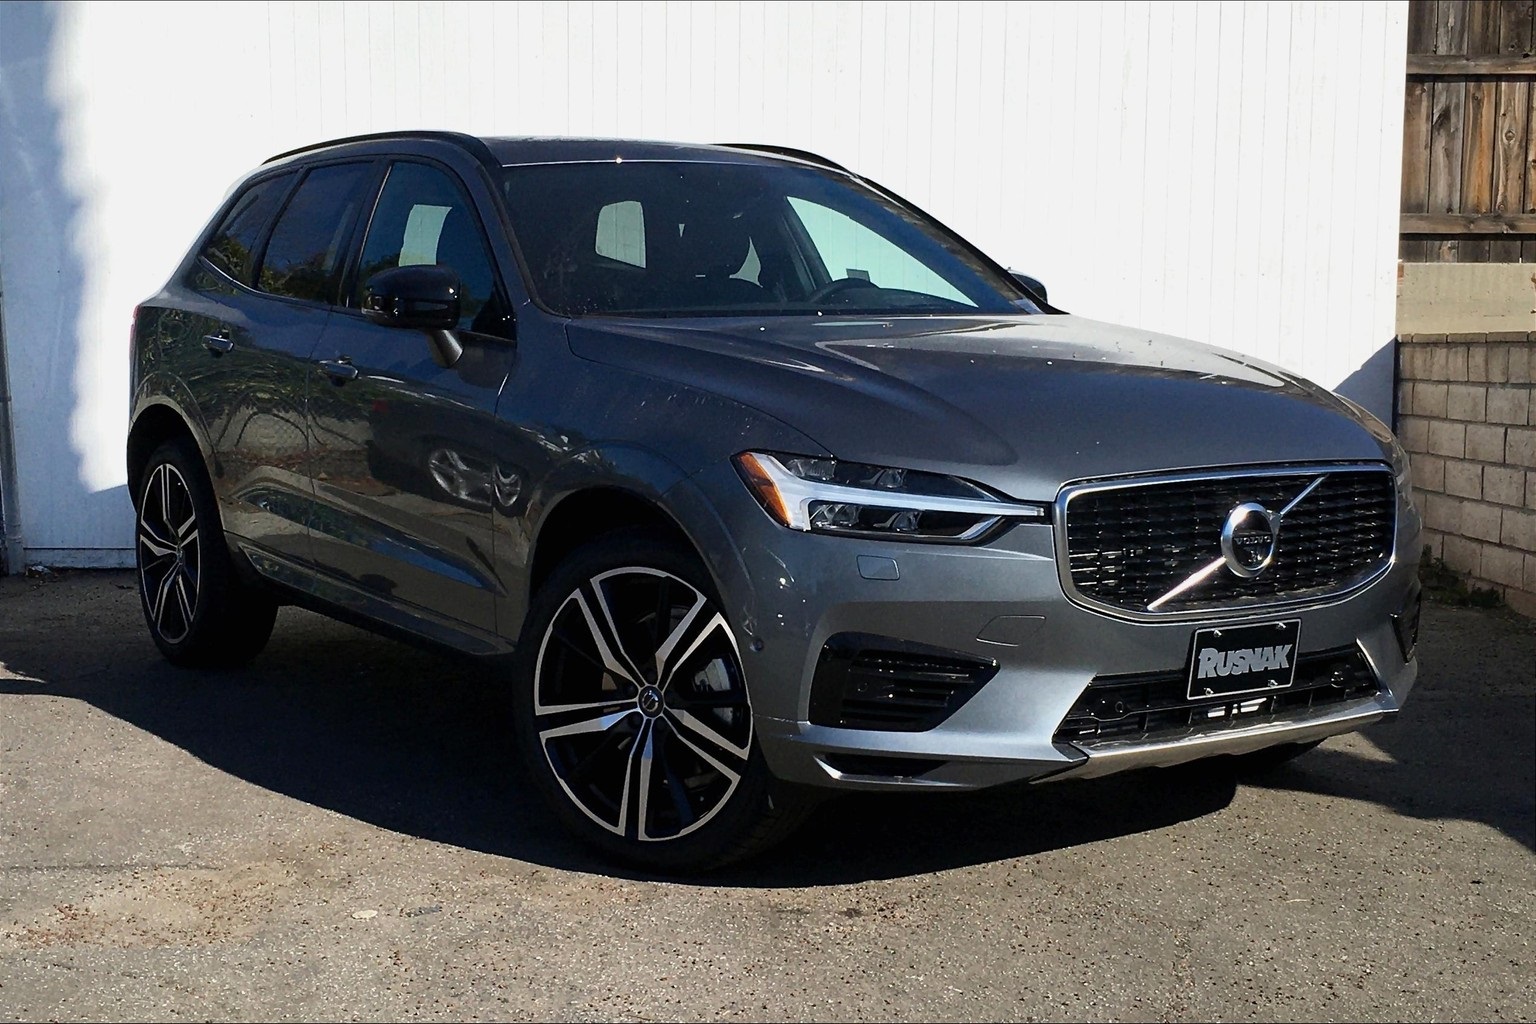 2019-volvo-s60-t8-twin-engine-review-half-baked-hybrid-shows-volvo-is